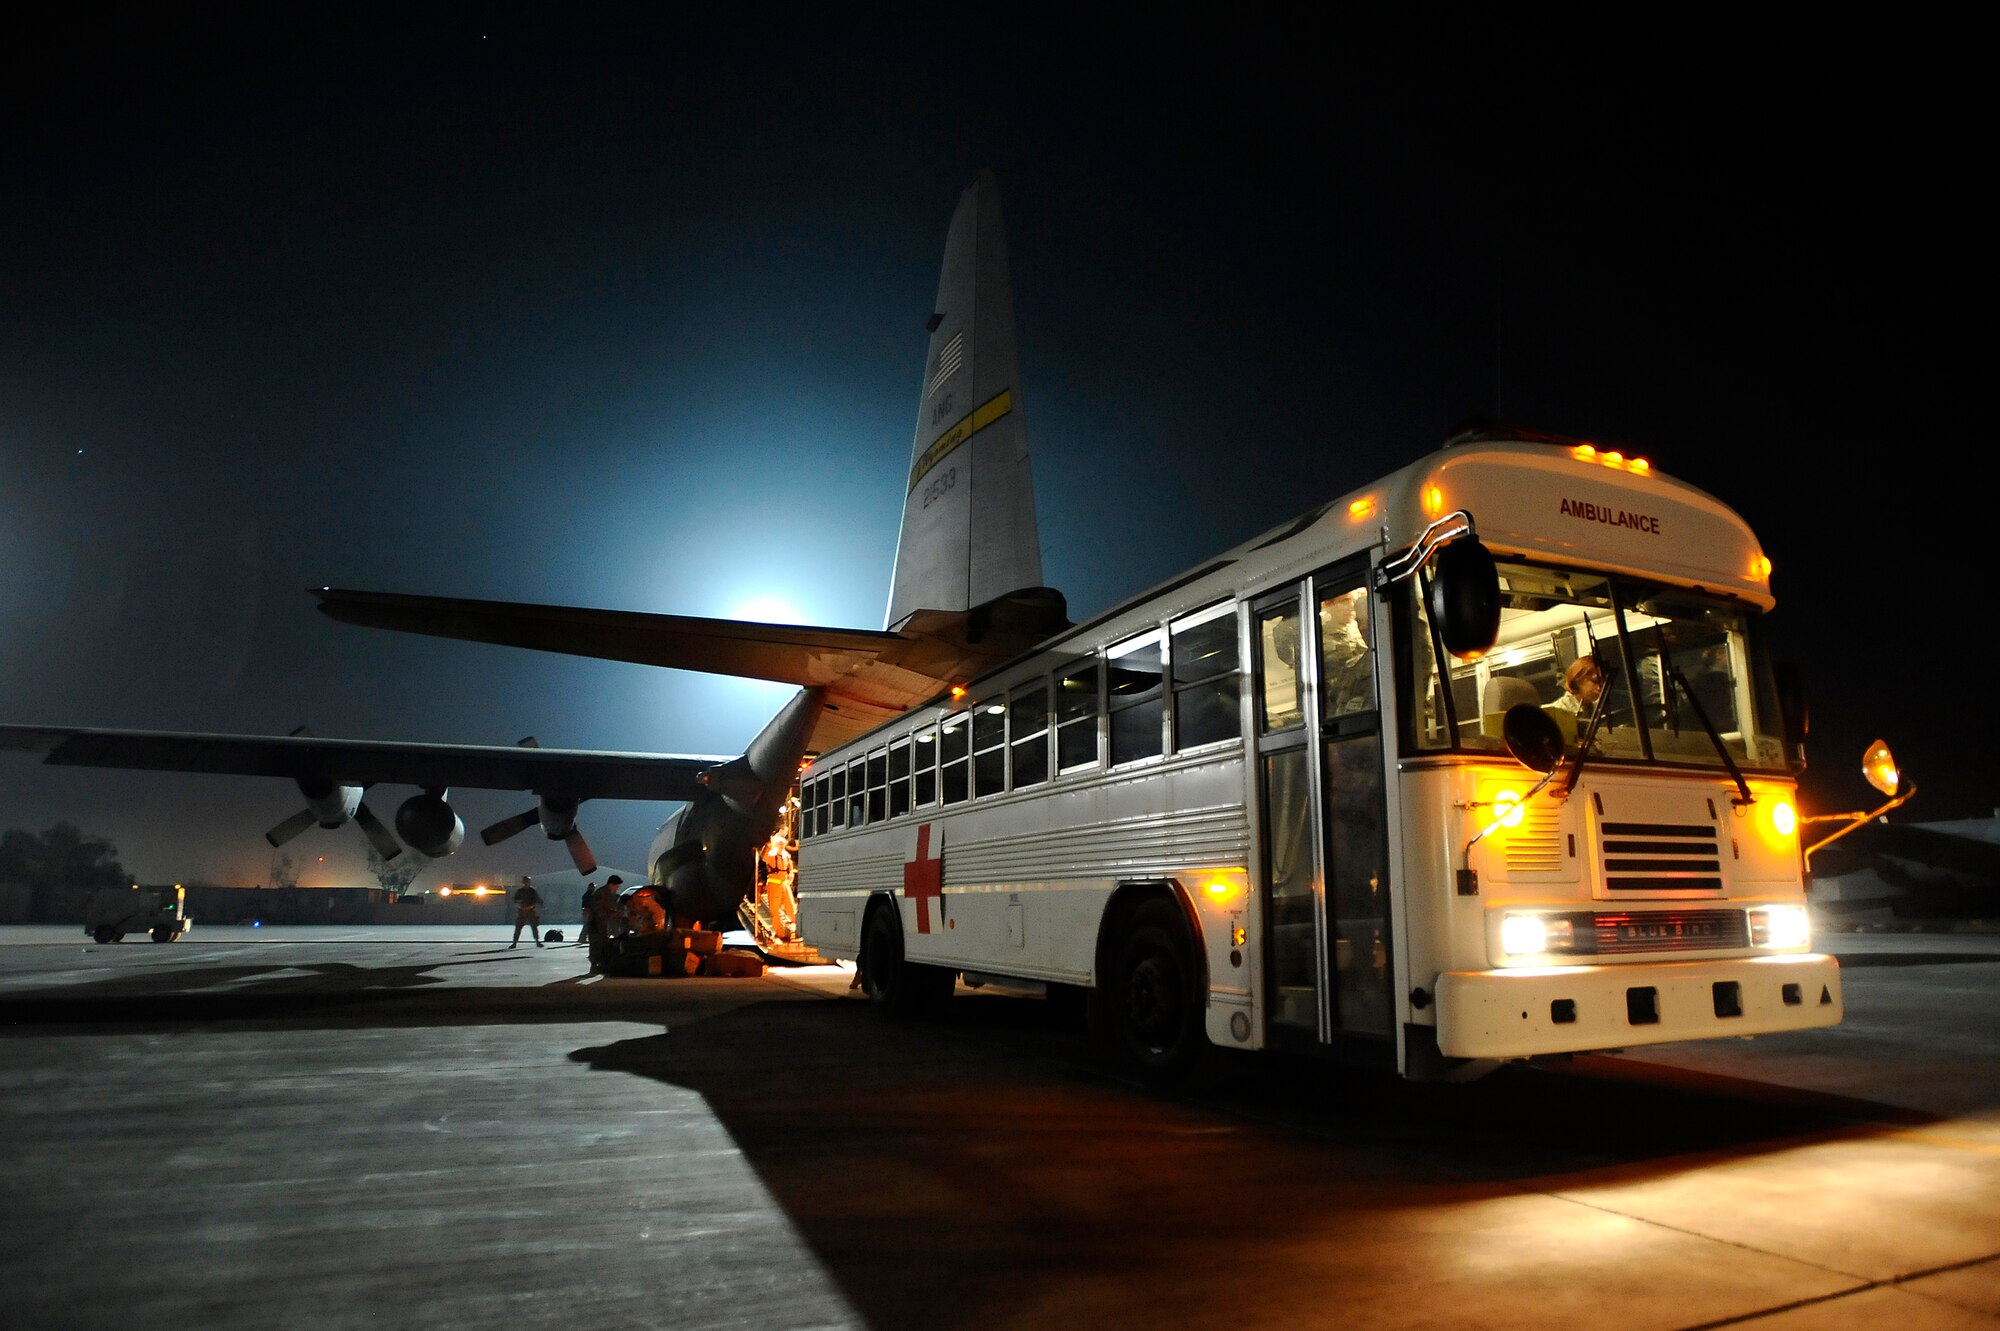 A bus from the Contingency Aeromedical Staging Facility at Joint Base Balad, Iraq, prepares to offload ambulatory and litter-bound patients from a C-130 Hercules shortly after midnight Nov. 8. Two Iraqi doctors from Iraq's Ministry of Defense accompanied a U.S. Air Force aeromedical evacuation mission to study aeromedical evacuation procedures so that they can establish an aeromedical evacuation service for the Iraqi air force. The C-130 is deployed to the 777th Expeditionary Airlift Squadron from the Wyoming Air National Guard's 153rd Airlift Wing. (U.S. Air Force photo/Airman 1st Class Jason Epley)